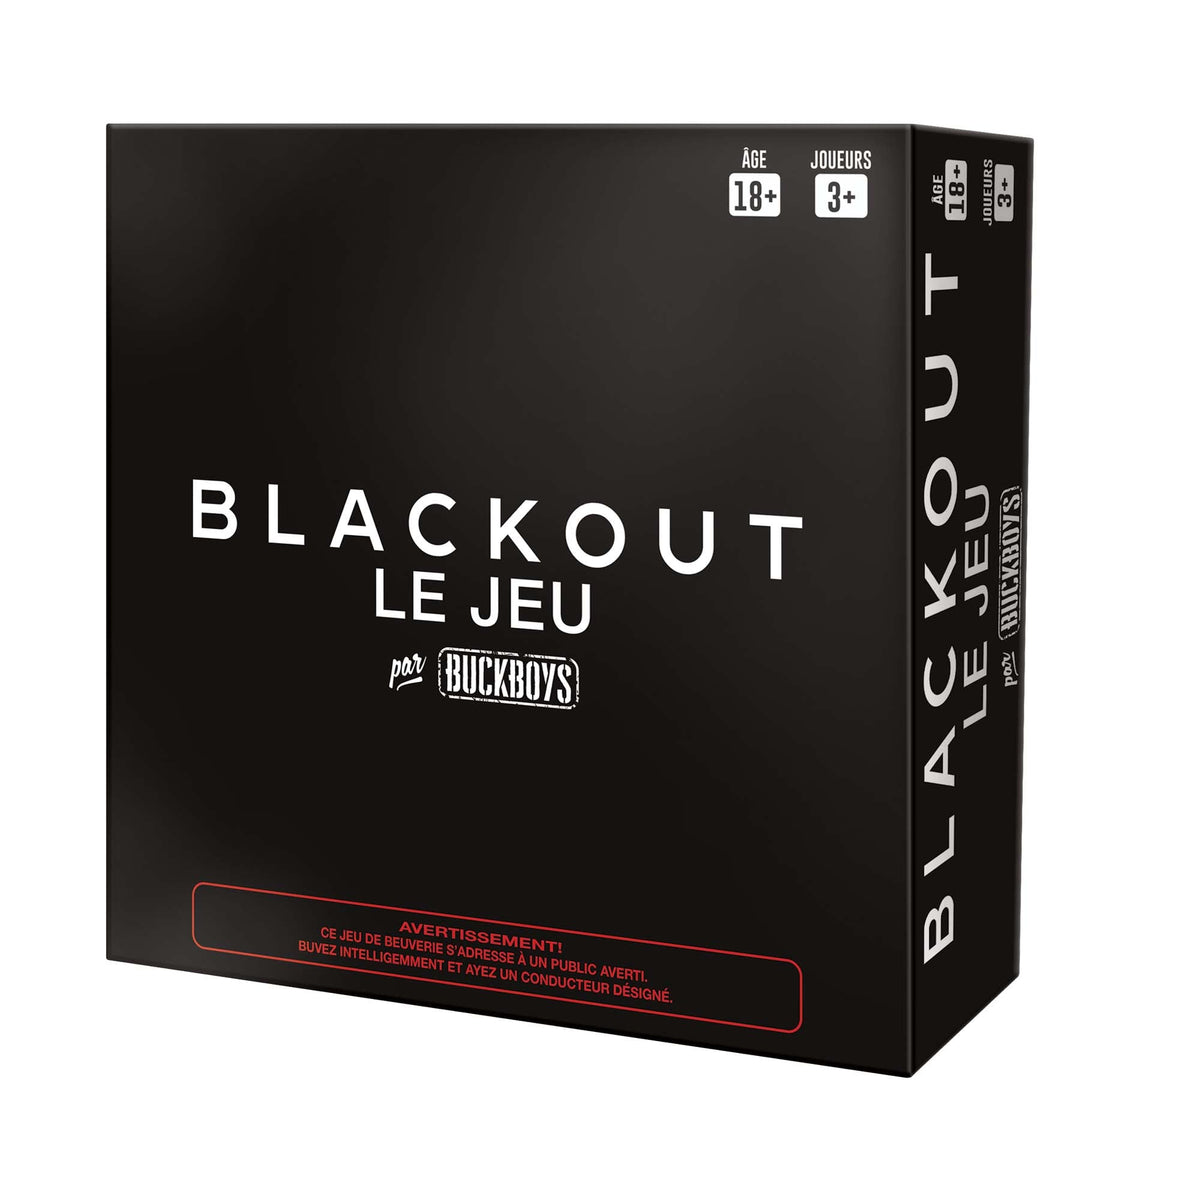 LES ÉDITIONS GLADIUS INT.INC. Toys & Games Blackout 18+ Game, French Version, 1 Count